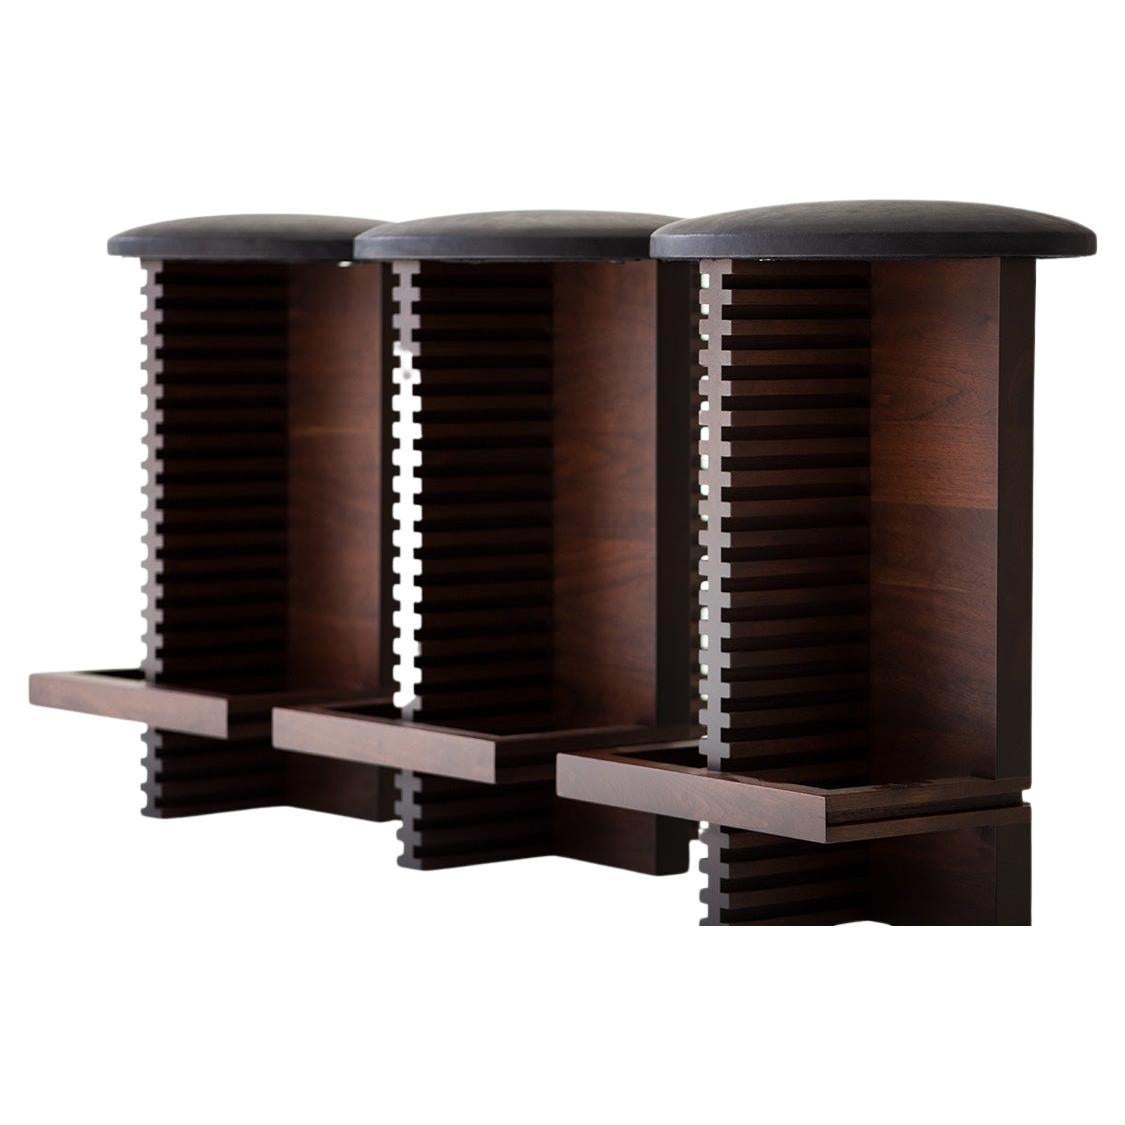 The Moderns Counter Stools in Walnut, Cicely Collection